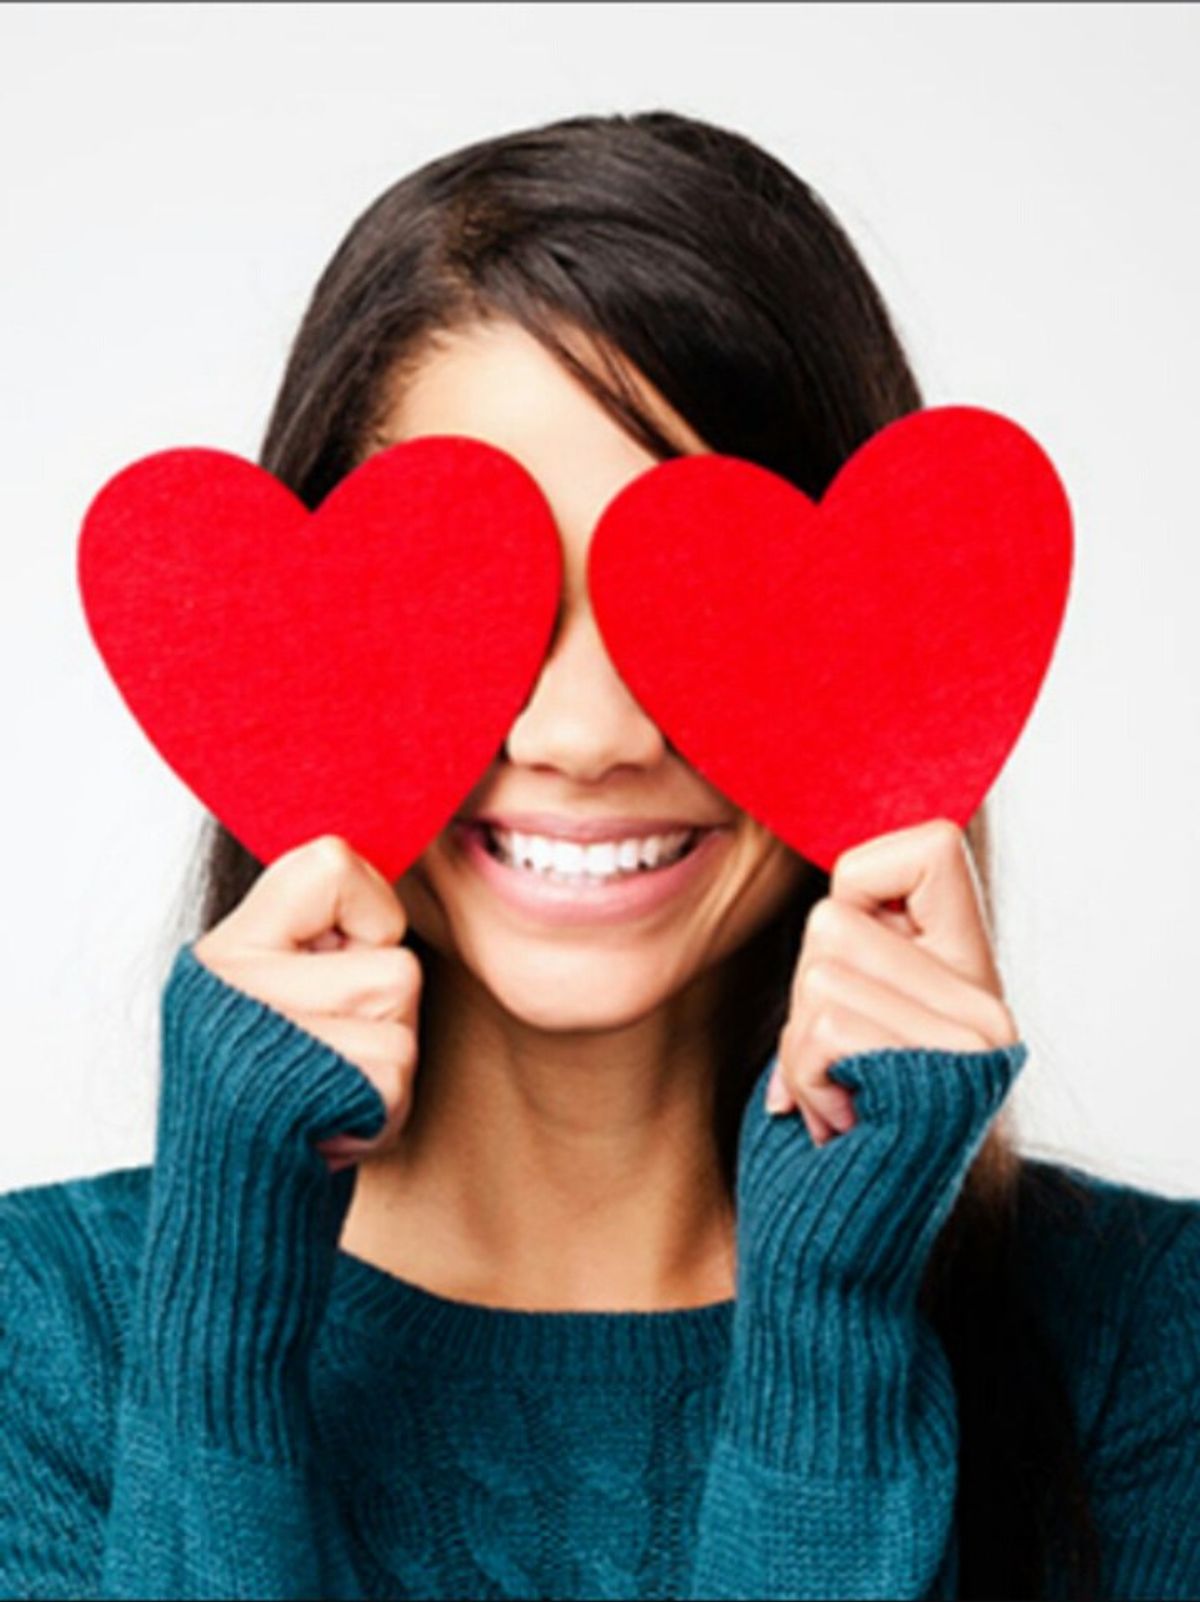 Five Thing To Do While Single On Valentine's Day